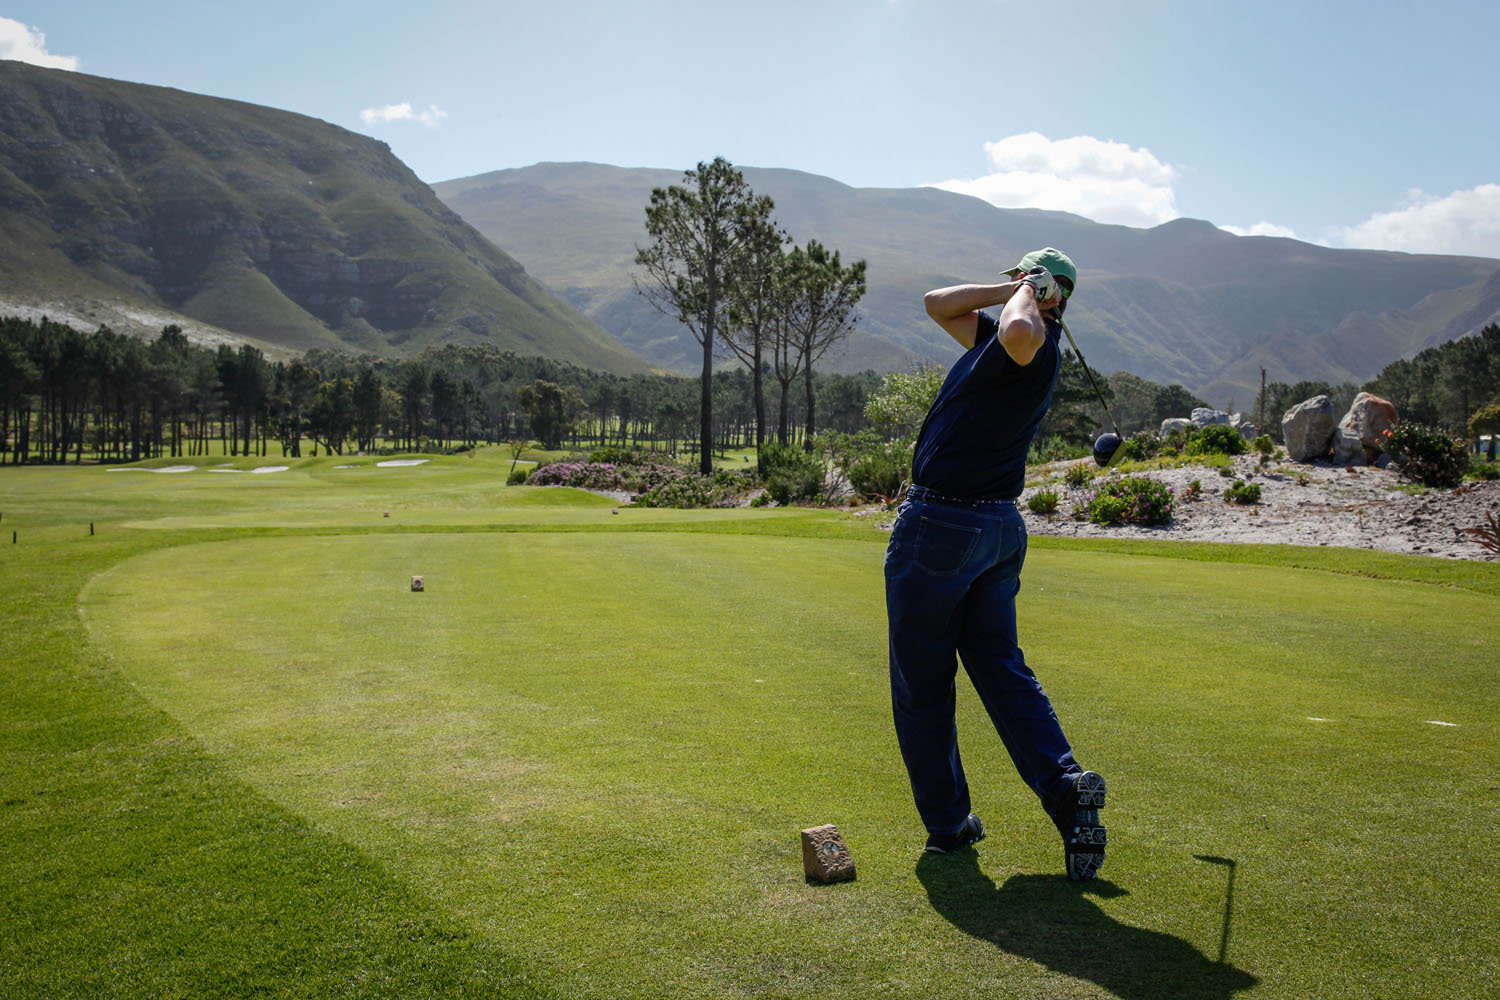 A golfer teeing off on a golf course in Hermanus, close to Hermanus Heights